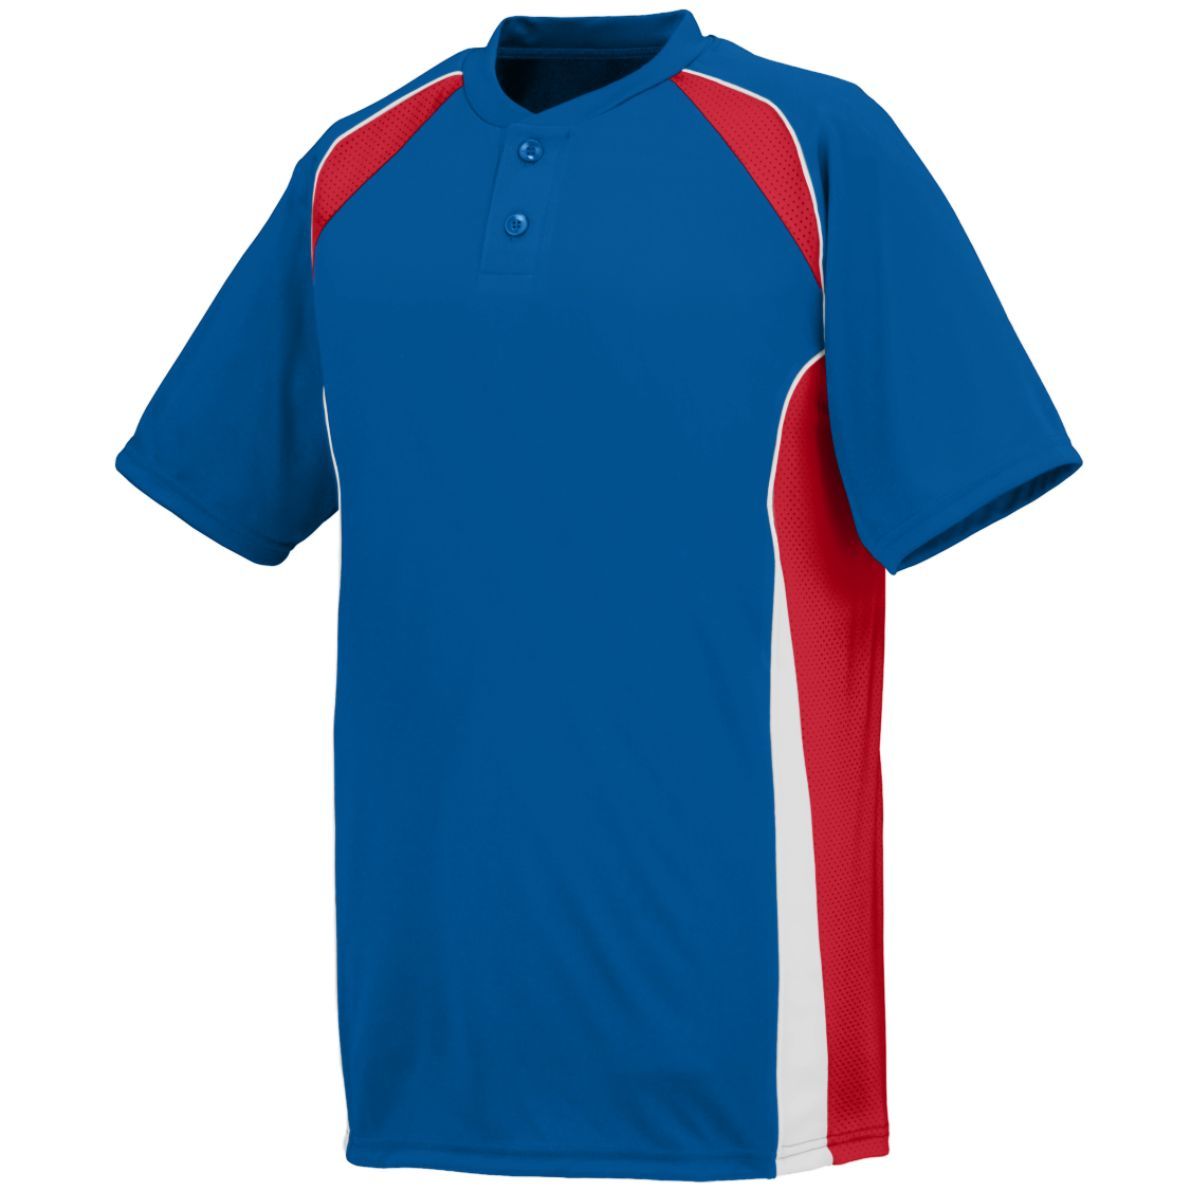 Augusta Sportswear Youth Base Hit Jersey in Royal/Red/White  -Part of the Youth, Youth-Jersey, Augusta-Products, Baseball, Shirts, All-Sports, All-Sports-1 product lines at KanaleyCreations.com